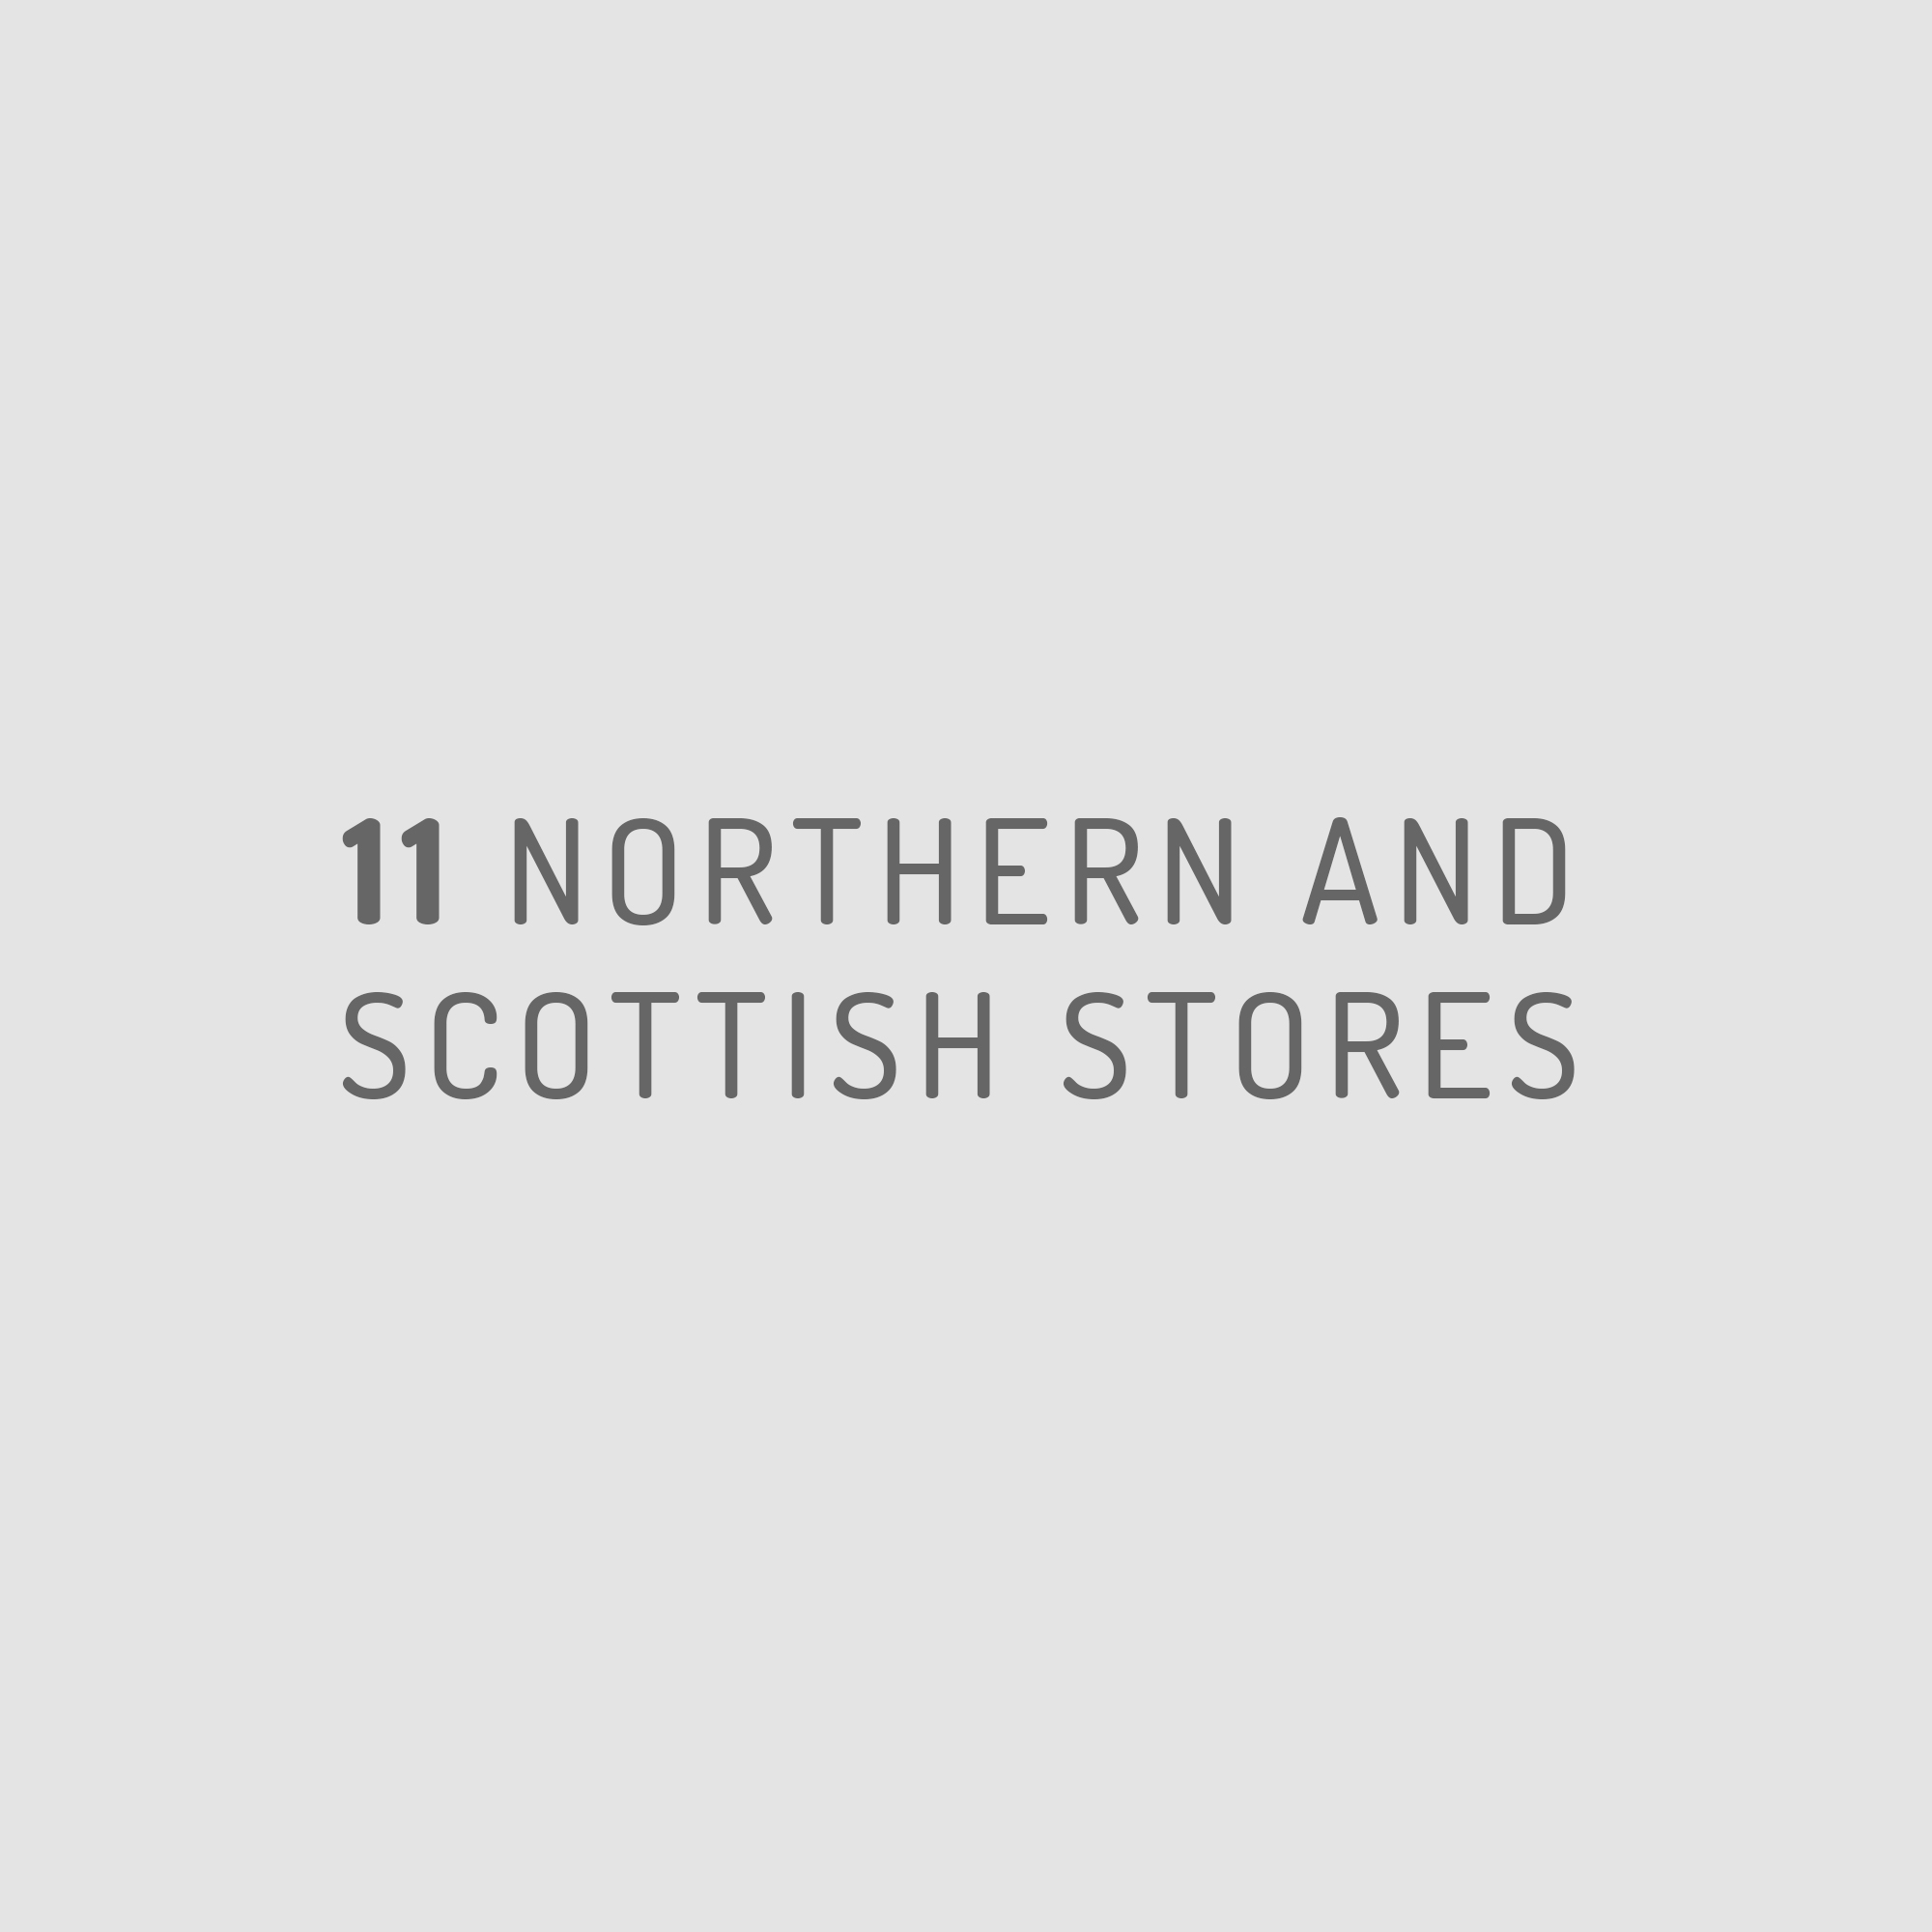 11-Stores-Graphic.jpg